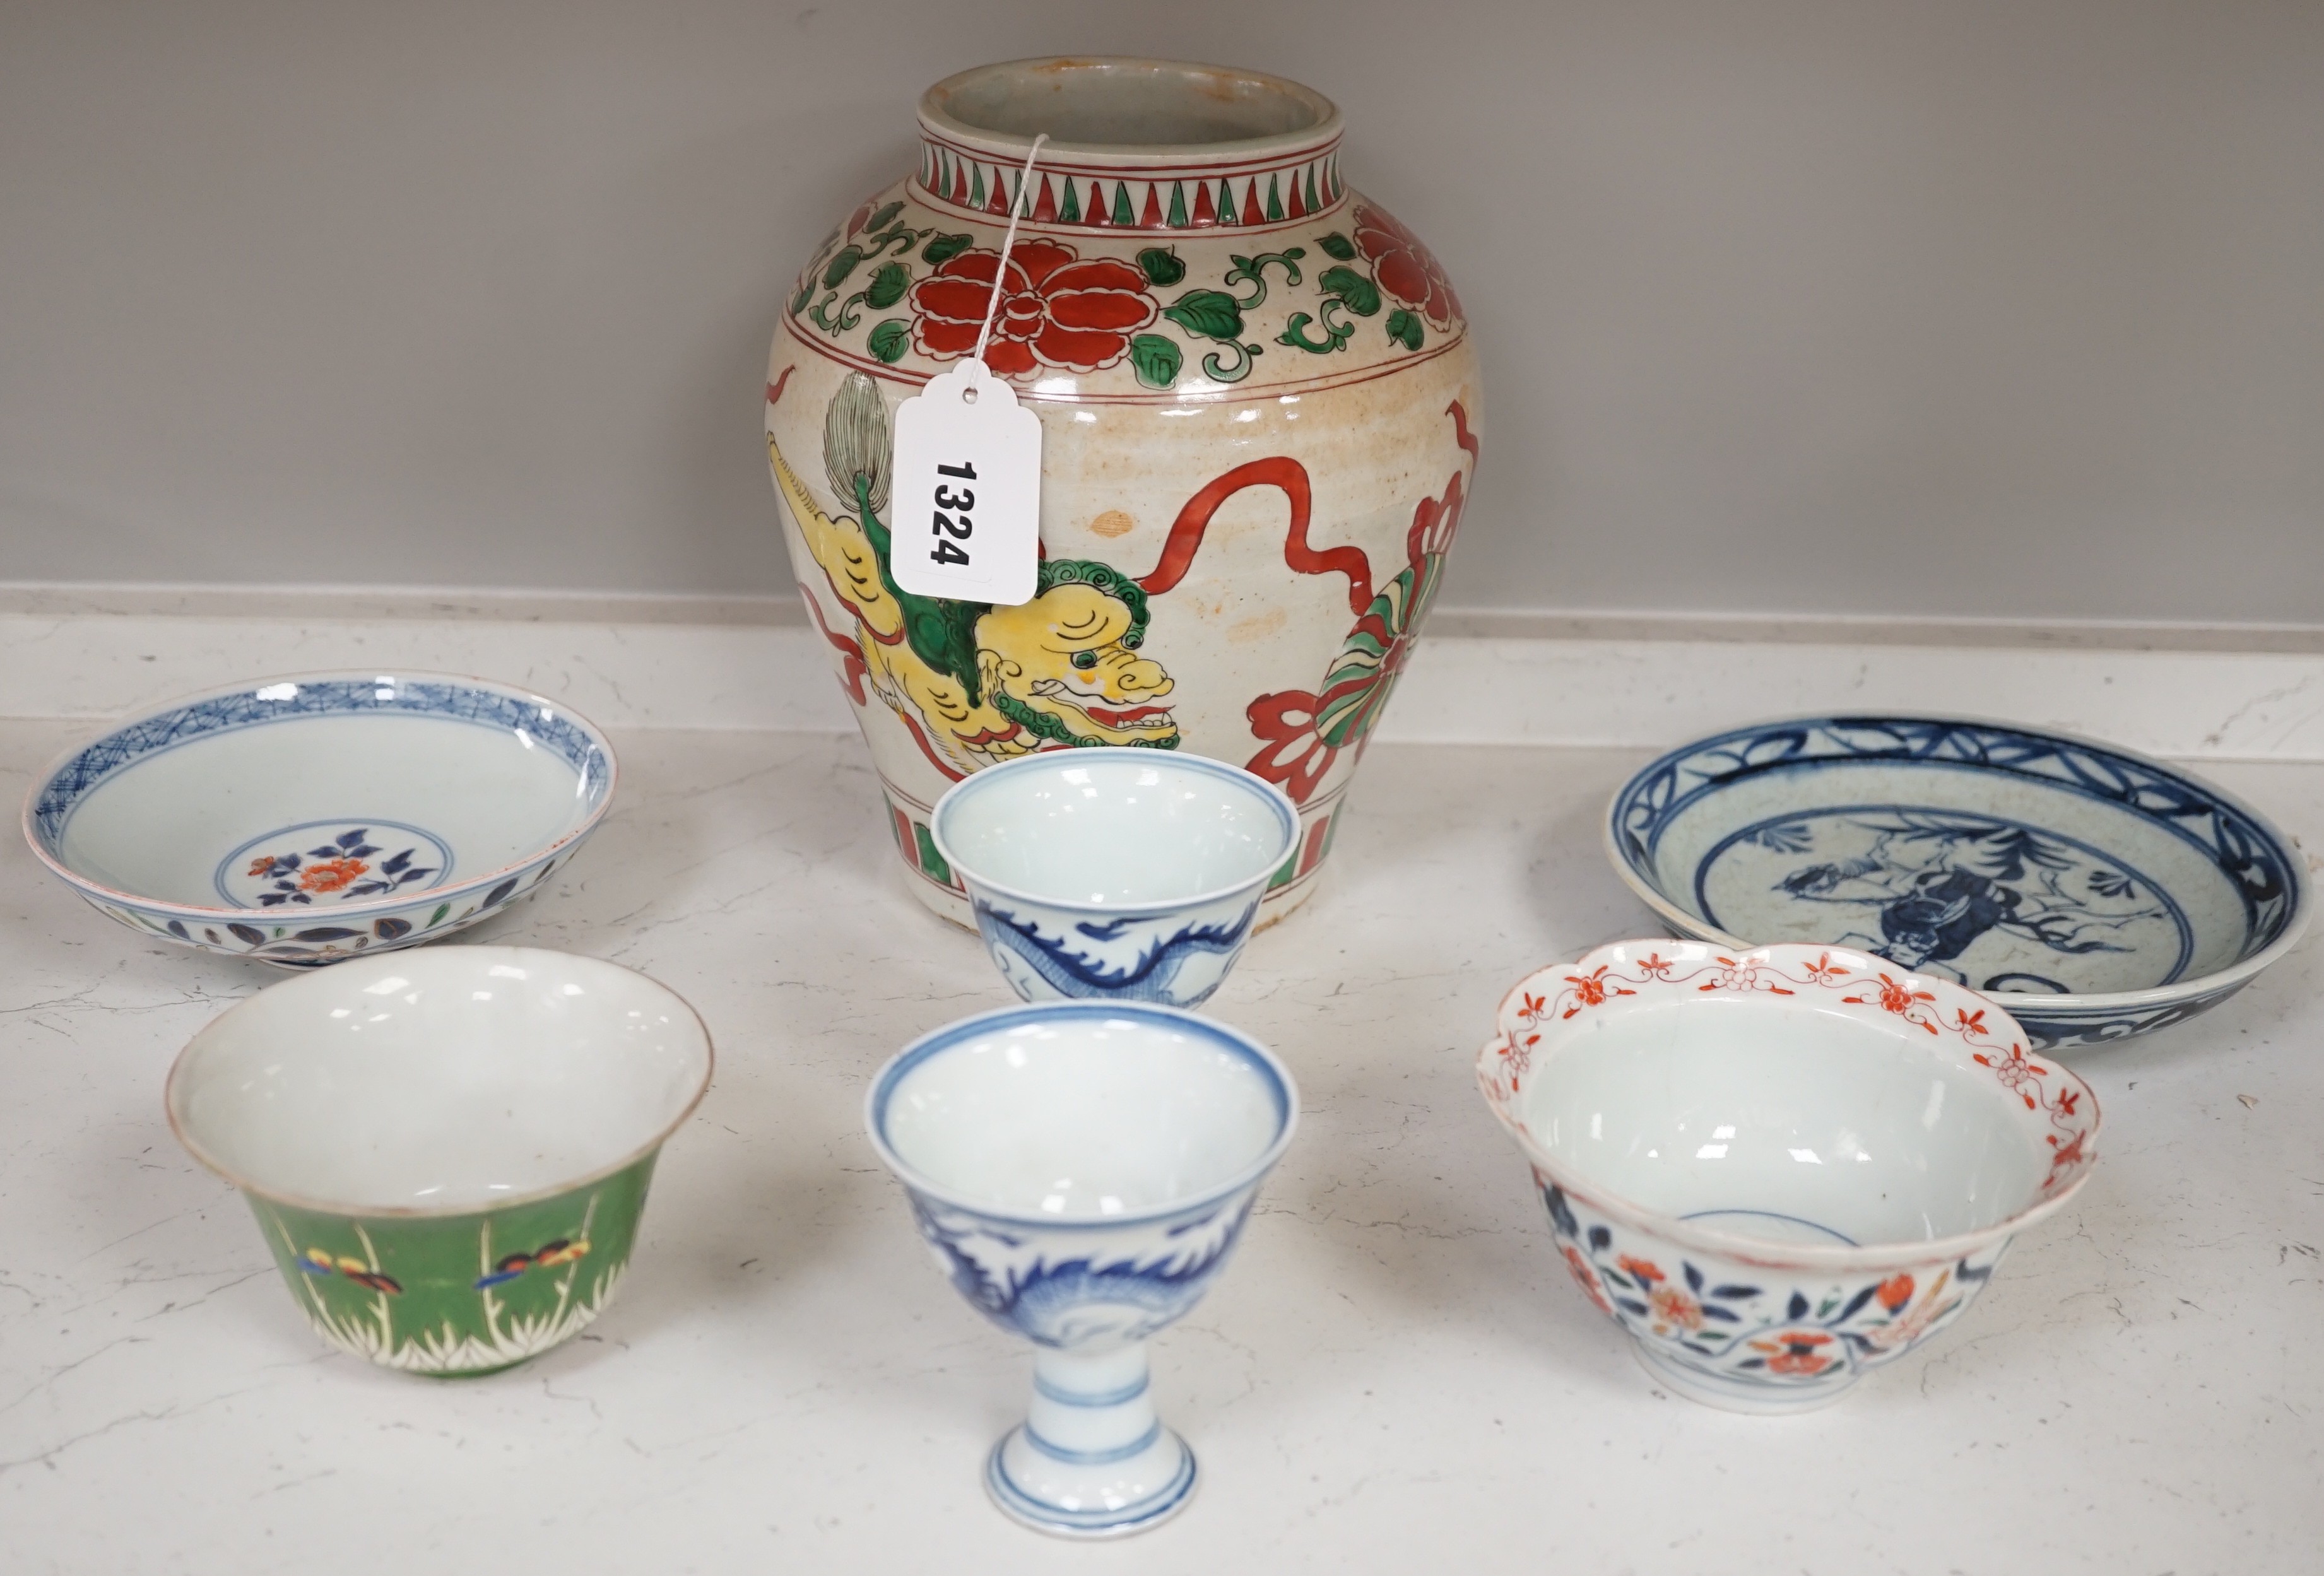 A Chinese wucai vase, two Imari bowls, a pair of Chinese blue and white dragon stem cups, Xuande marks, a Chinese blue and white dish, depicting a scholar on horseback, Xuande mark, a small green Chinese bowl, painted wi